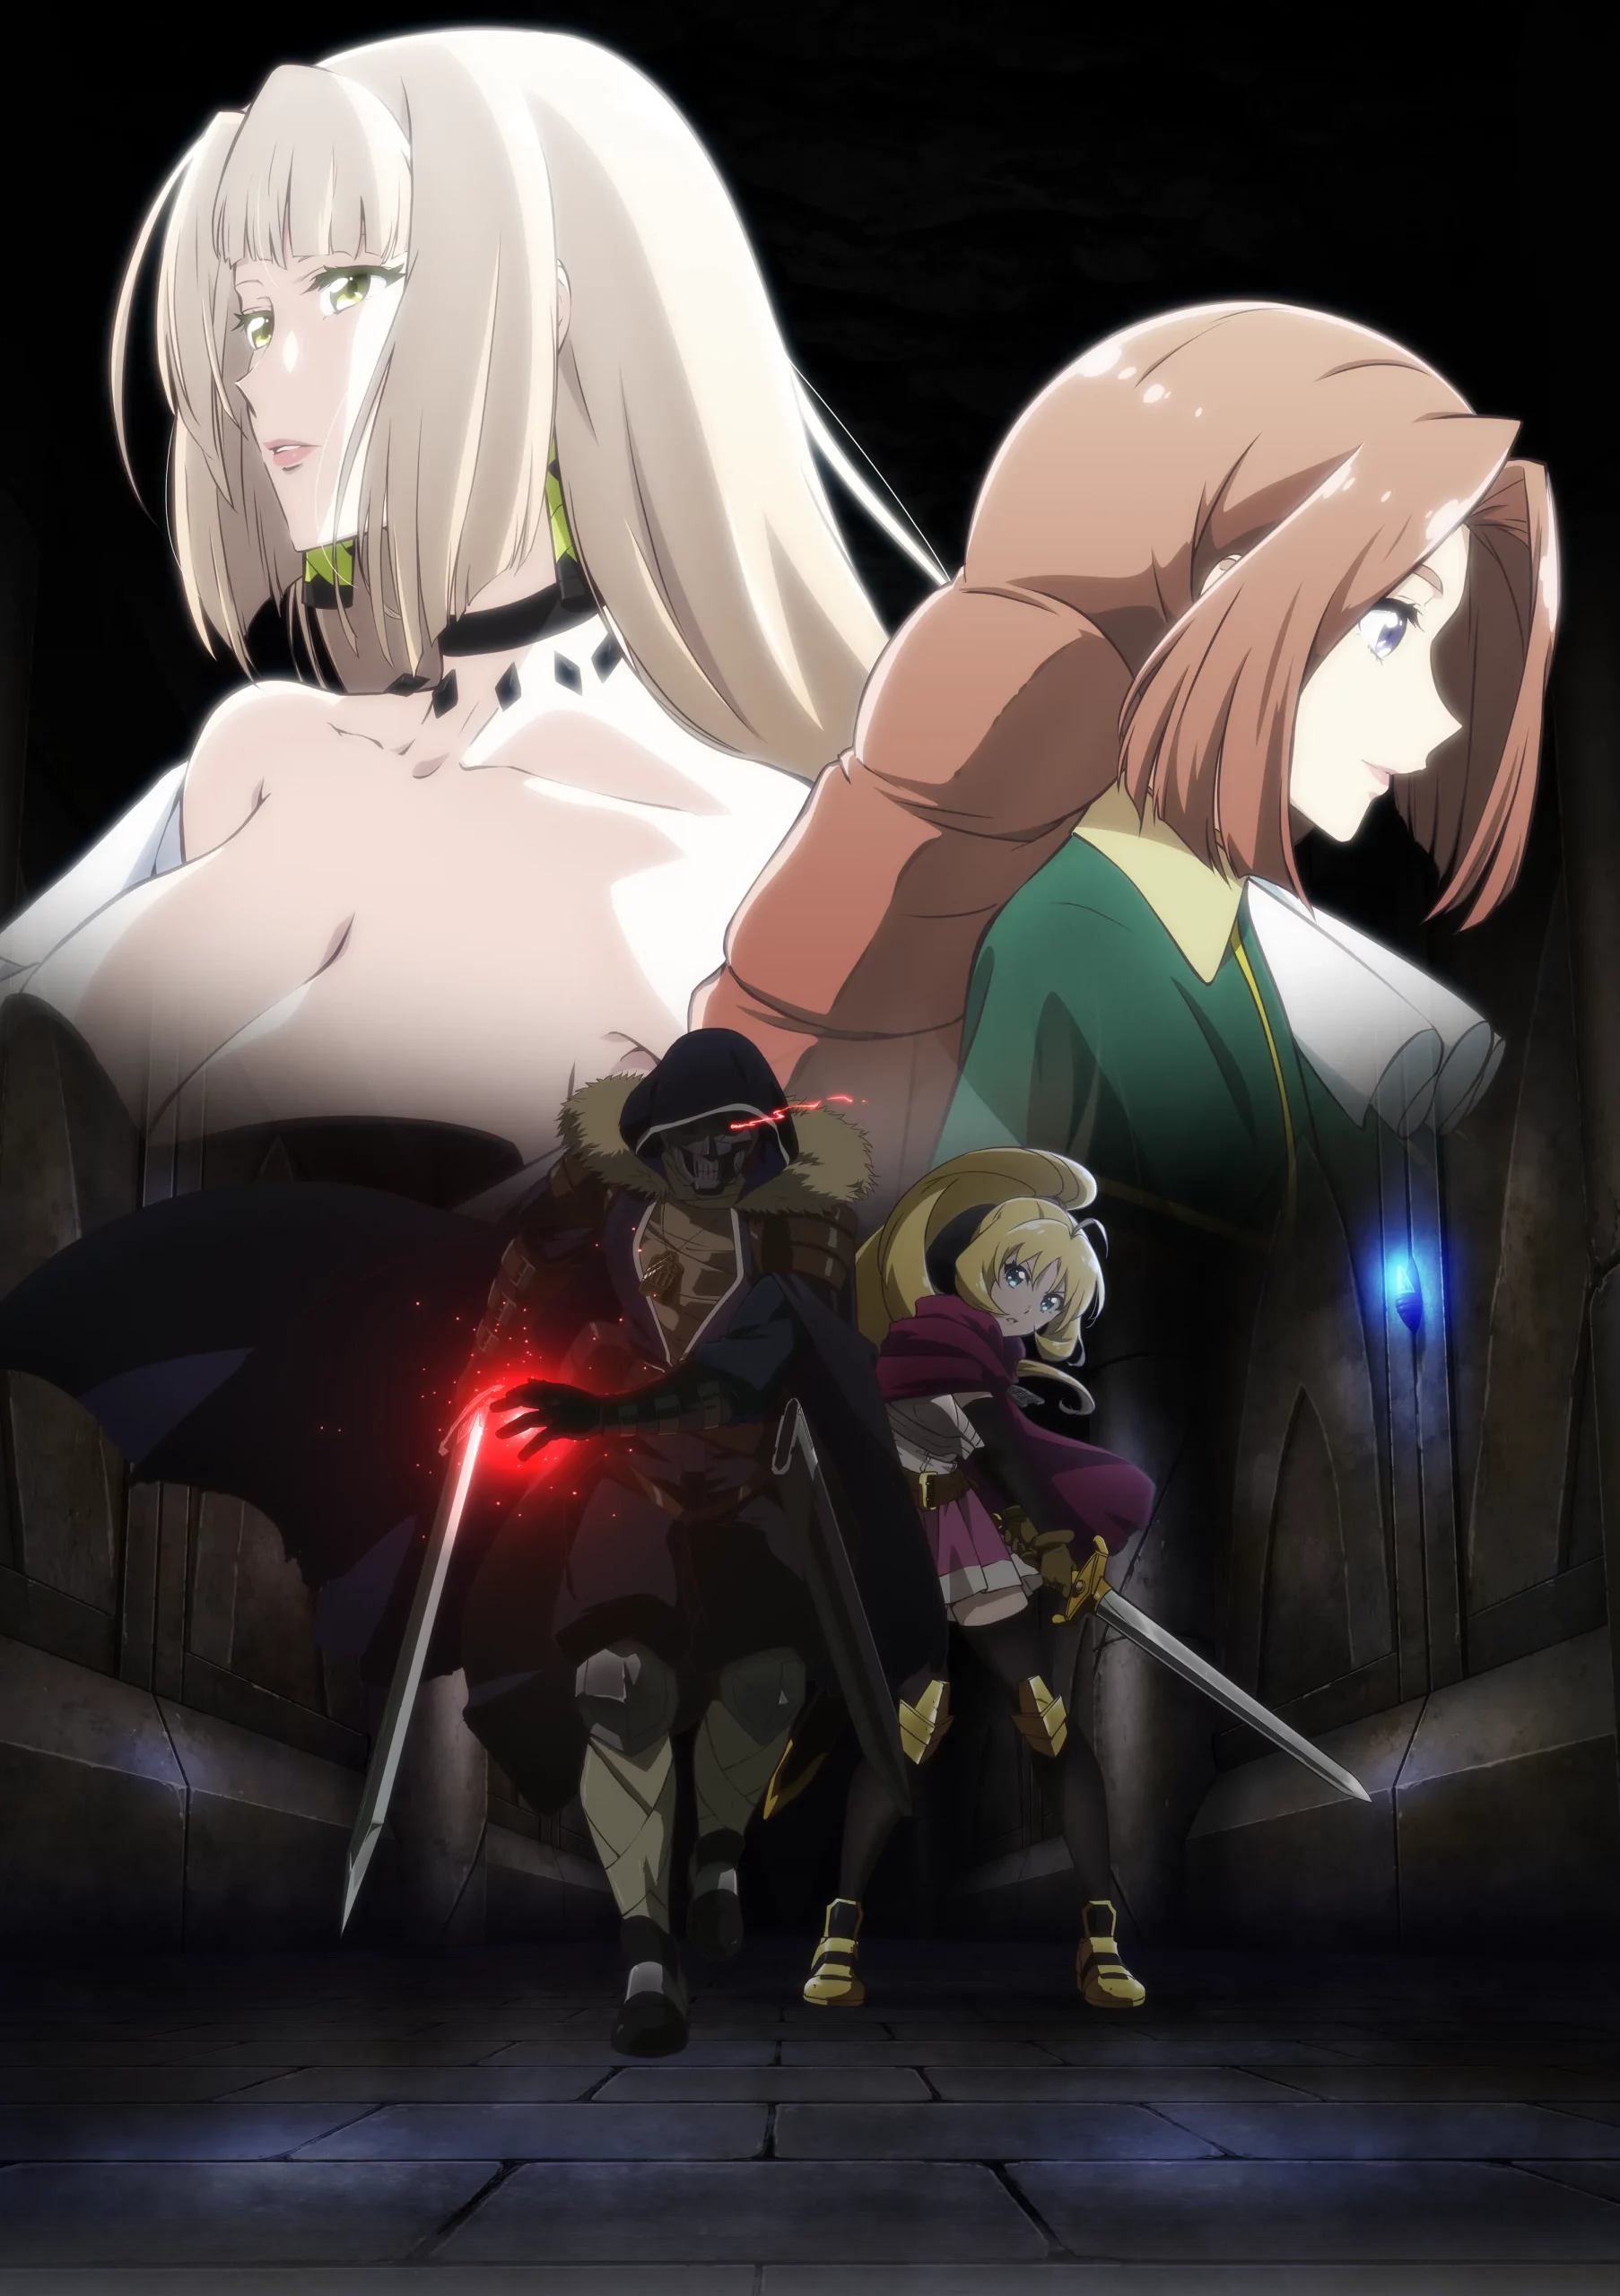 The Unwanted Undead Adventurer anime